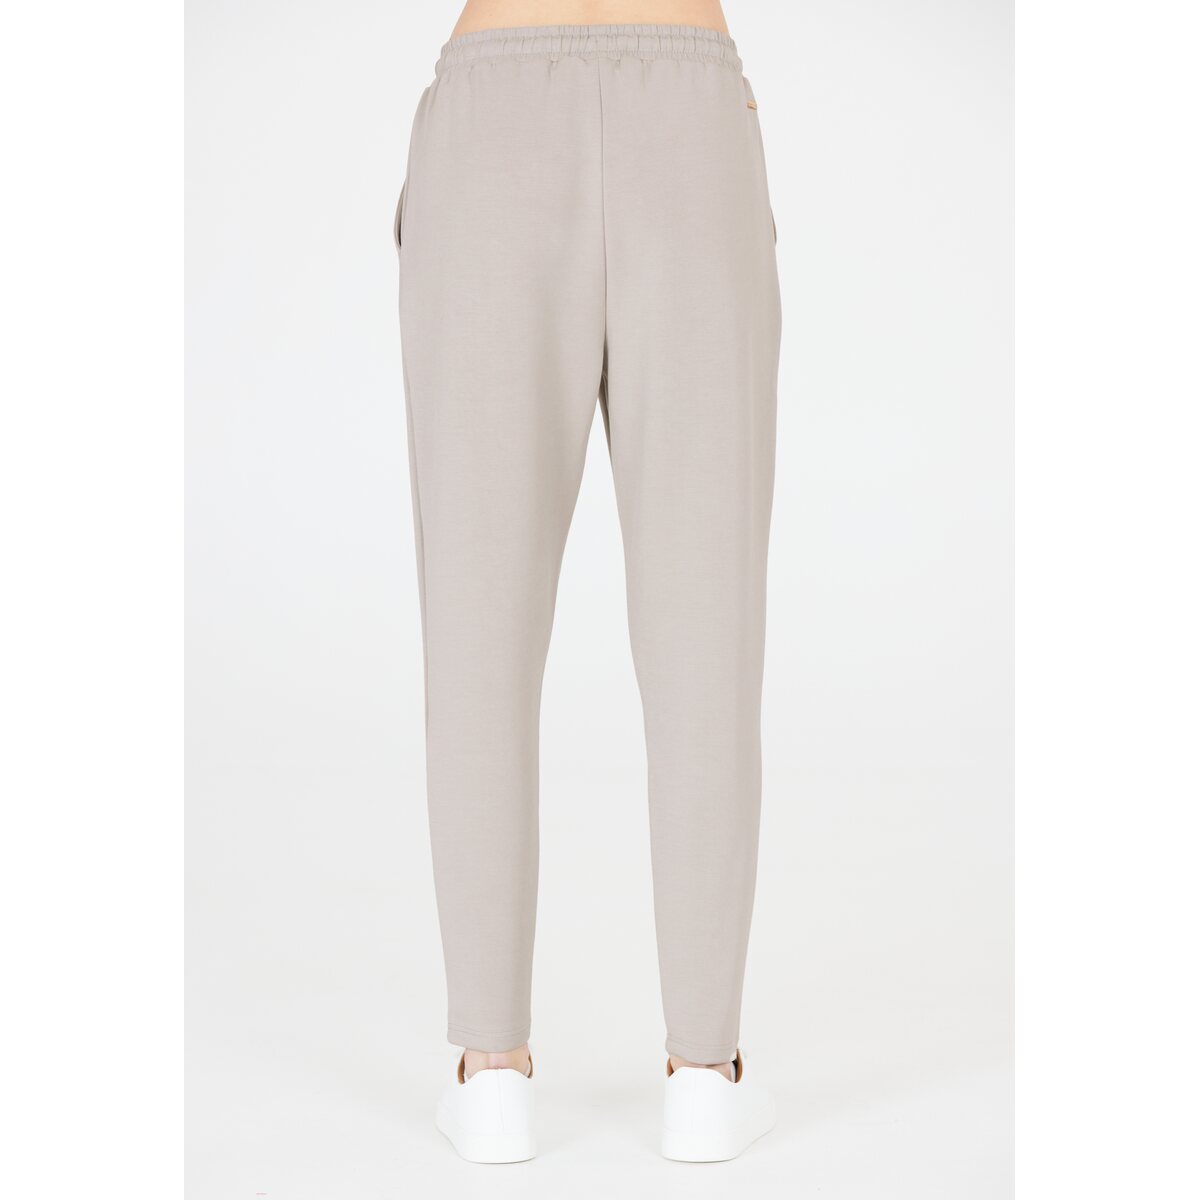 Athlecia Jacey V2 Womenswear Sweat Pants 7 Shaws Department Stores